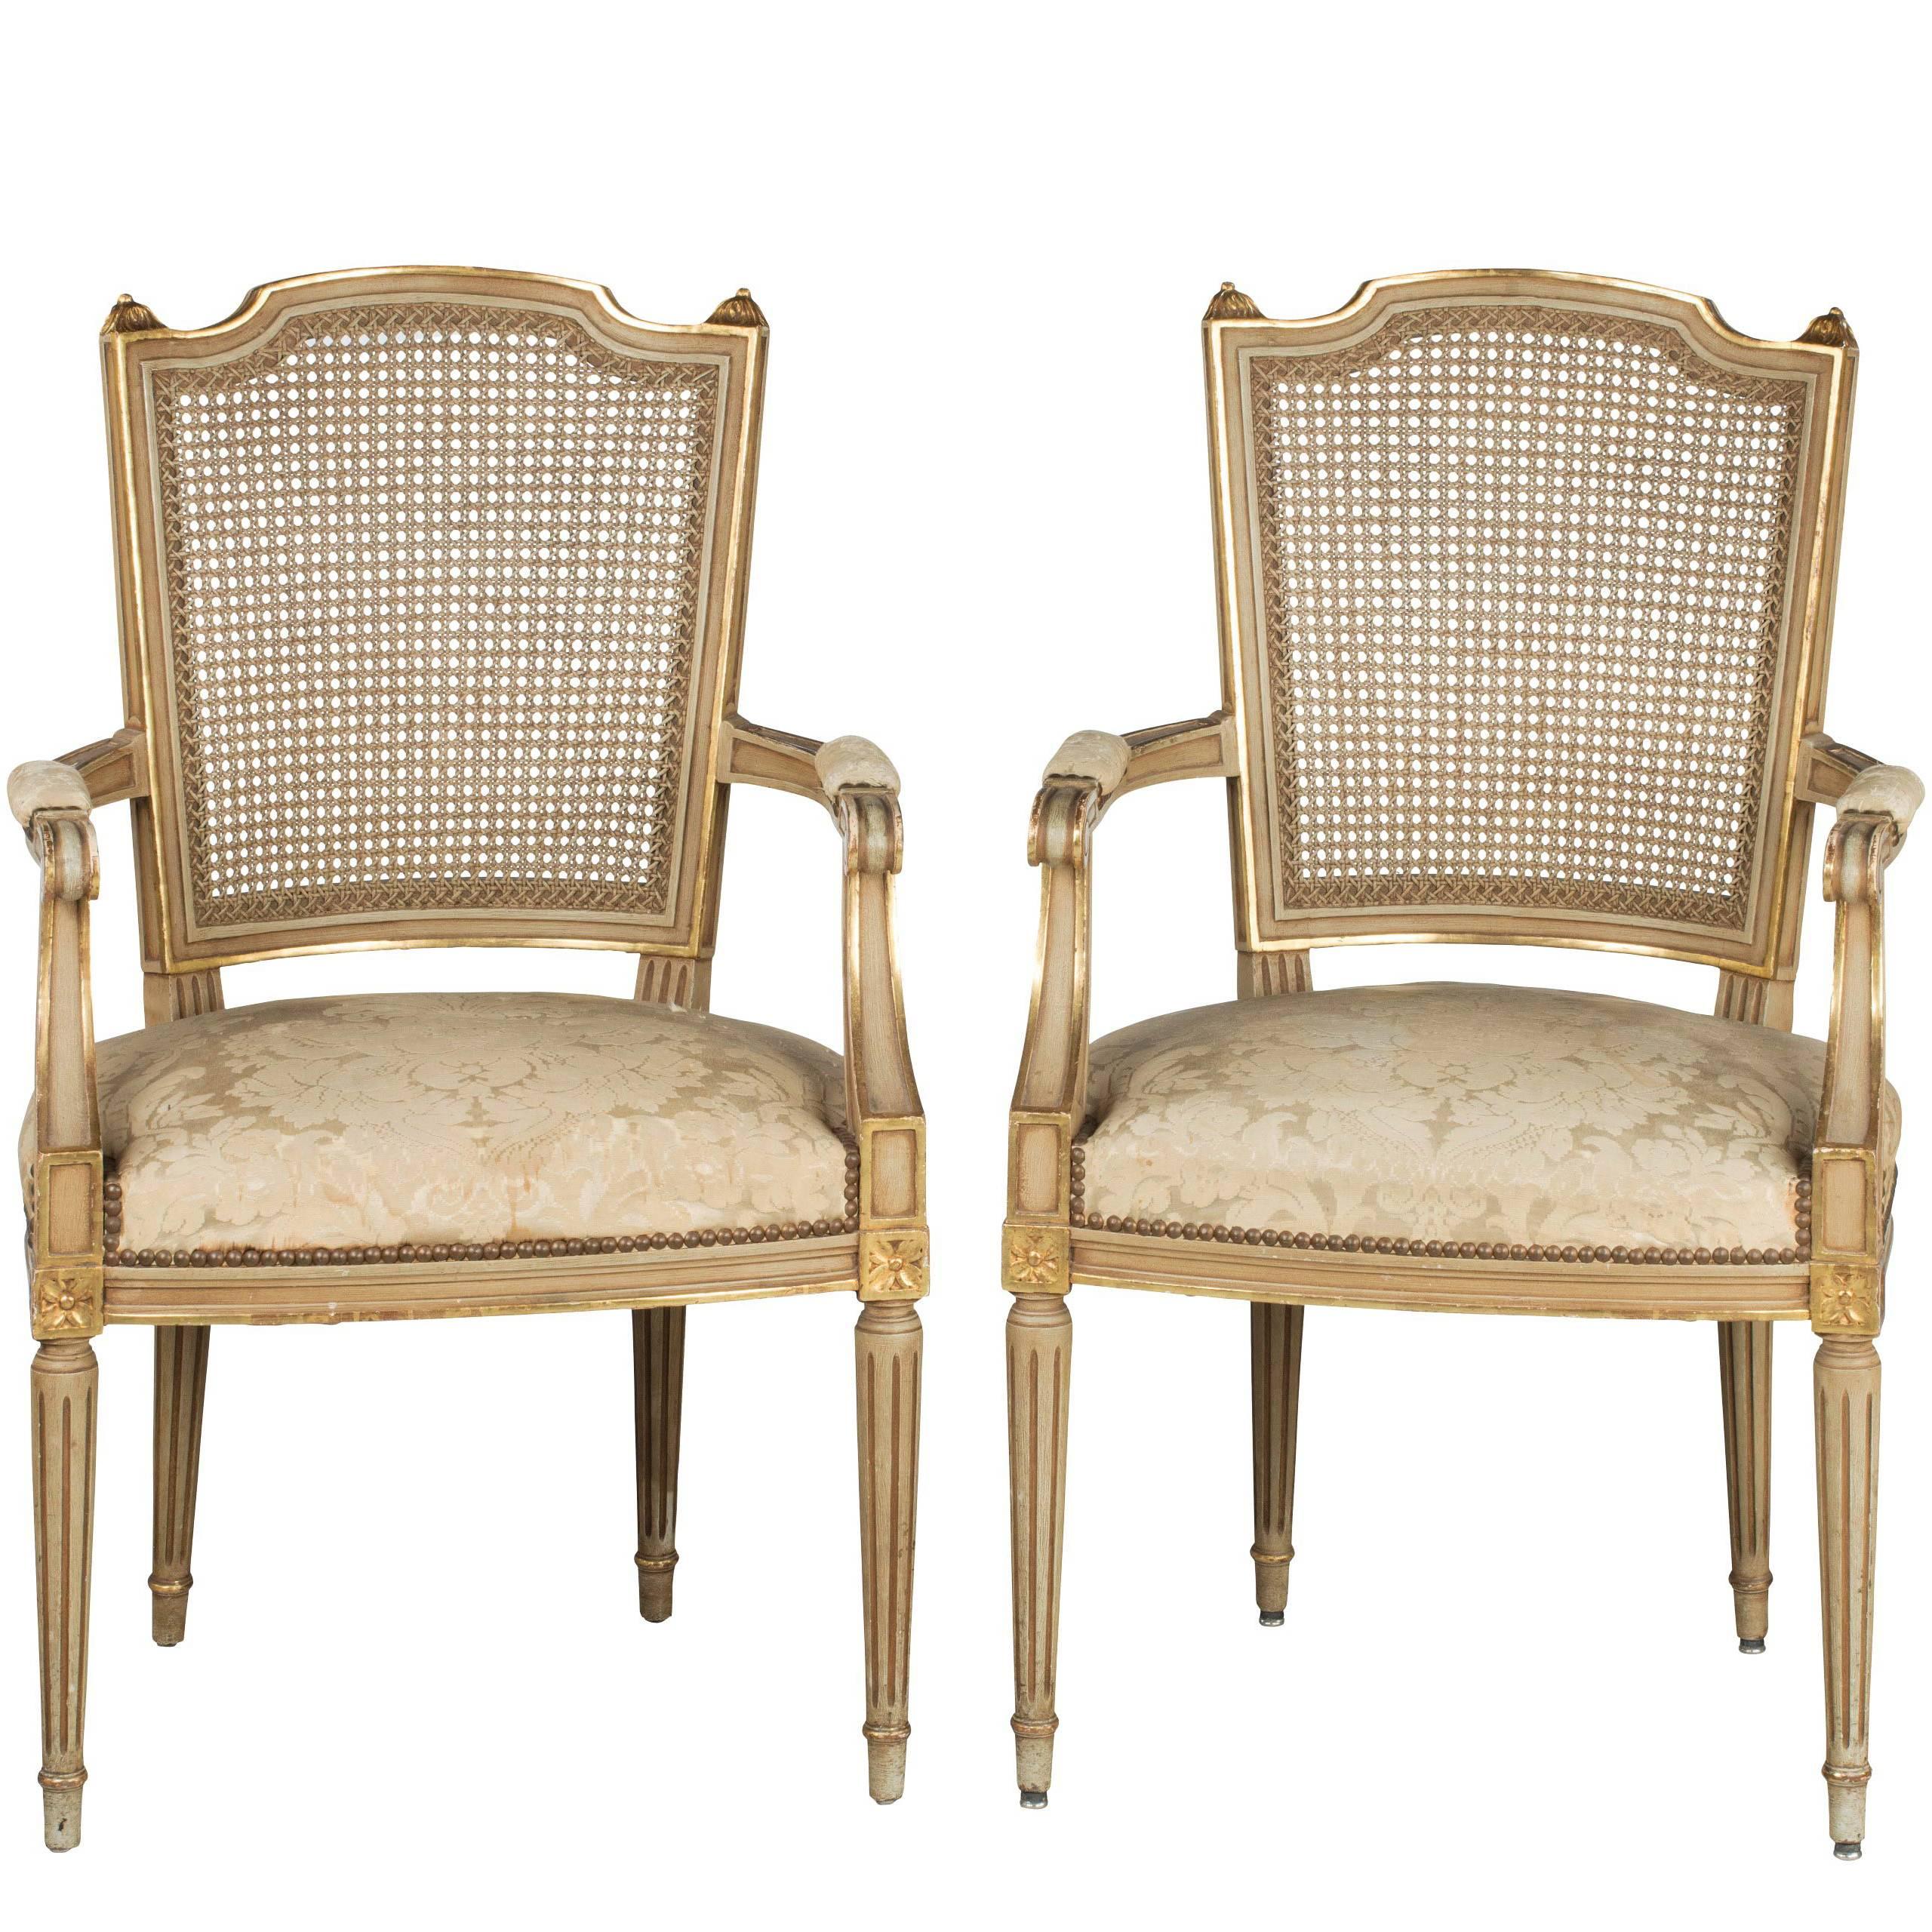 Pair of Early 20th Century French Painted and Parcel-Gilt Elbow Chairs